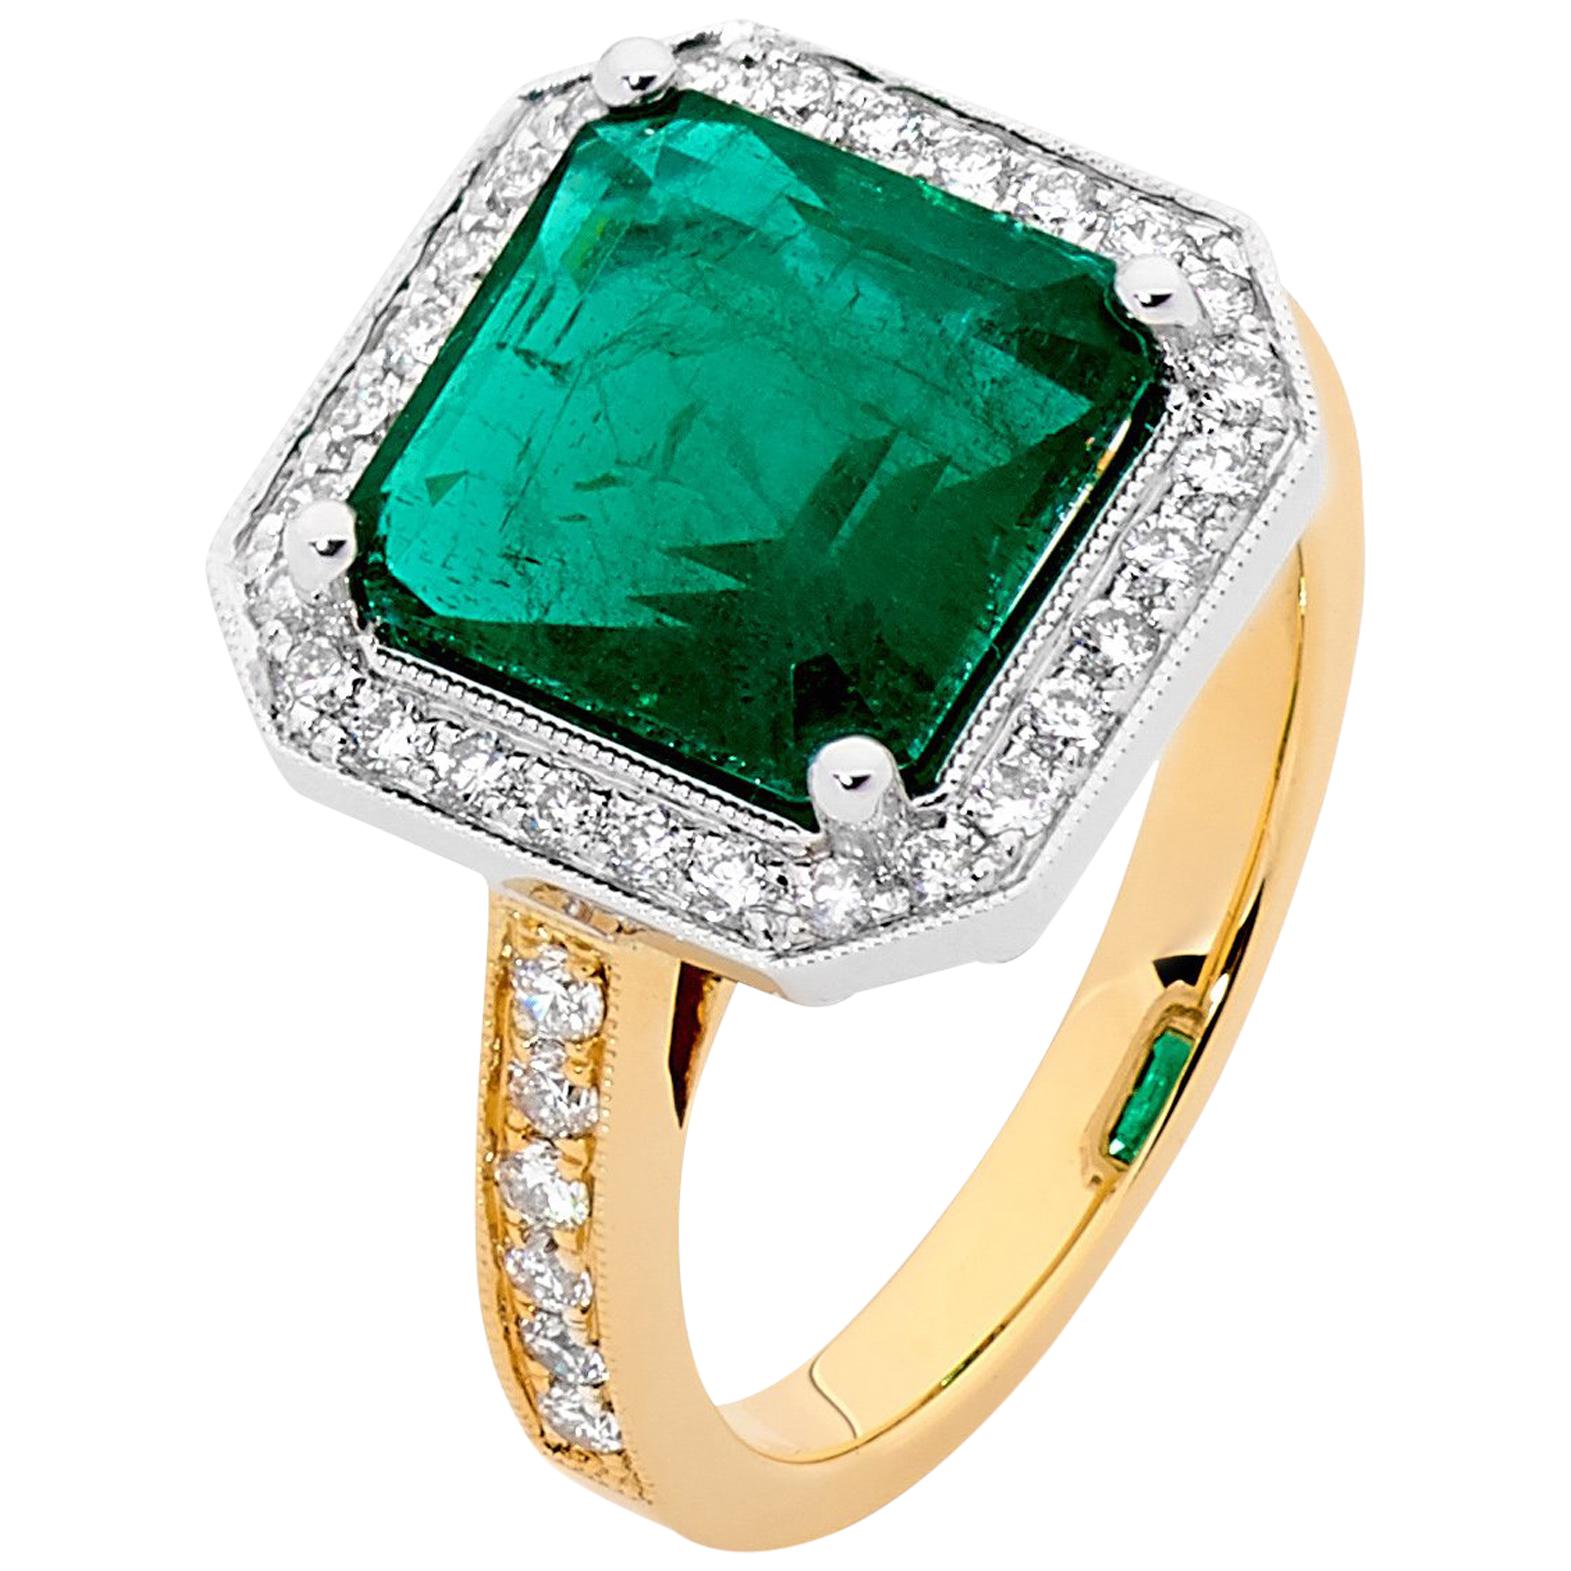 4.23 Carat Emerald White Diamonds 18 Carat White and Yellow Gold Ring For Sale